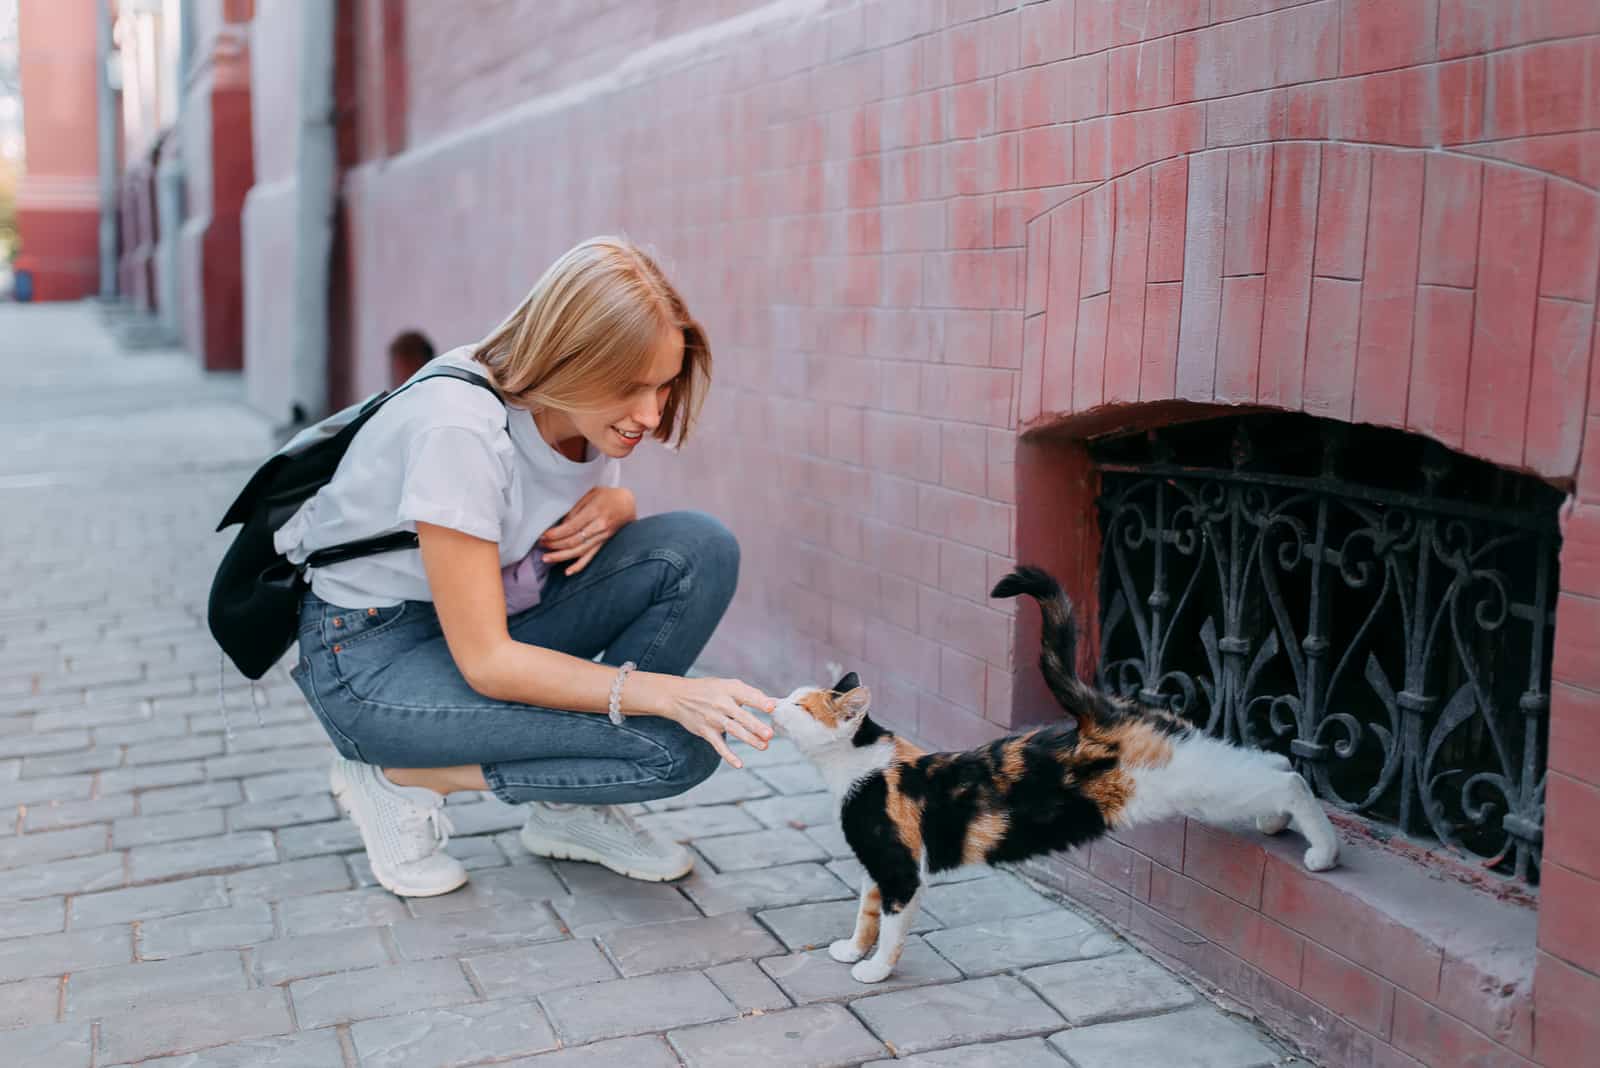 a woman on the street tries to pet a cat